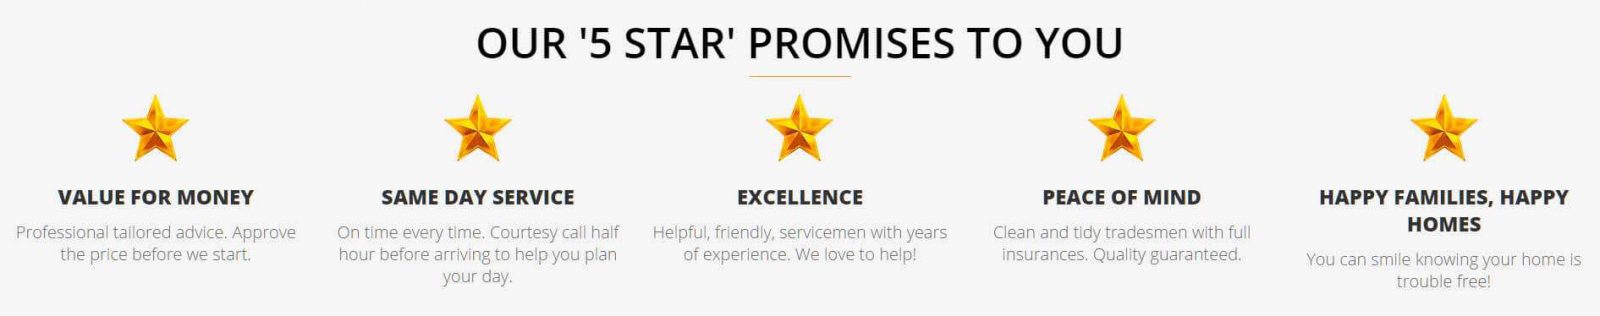 Localad Services 5 Star Promises Banner